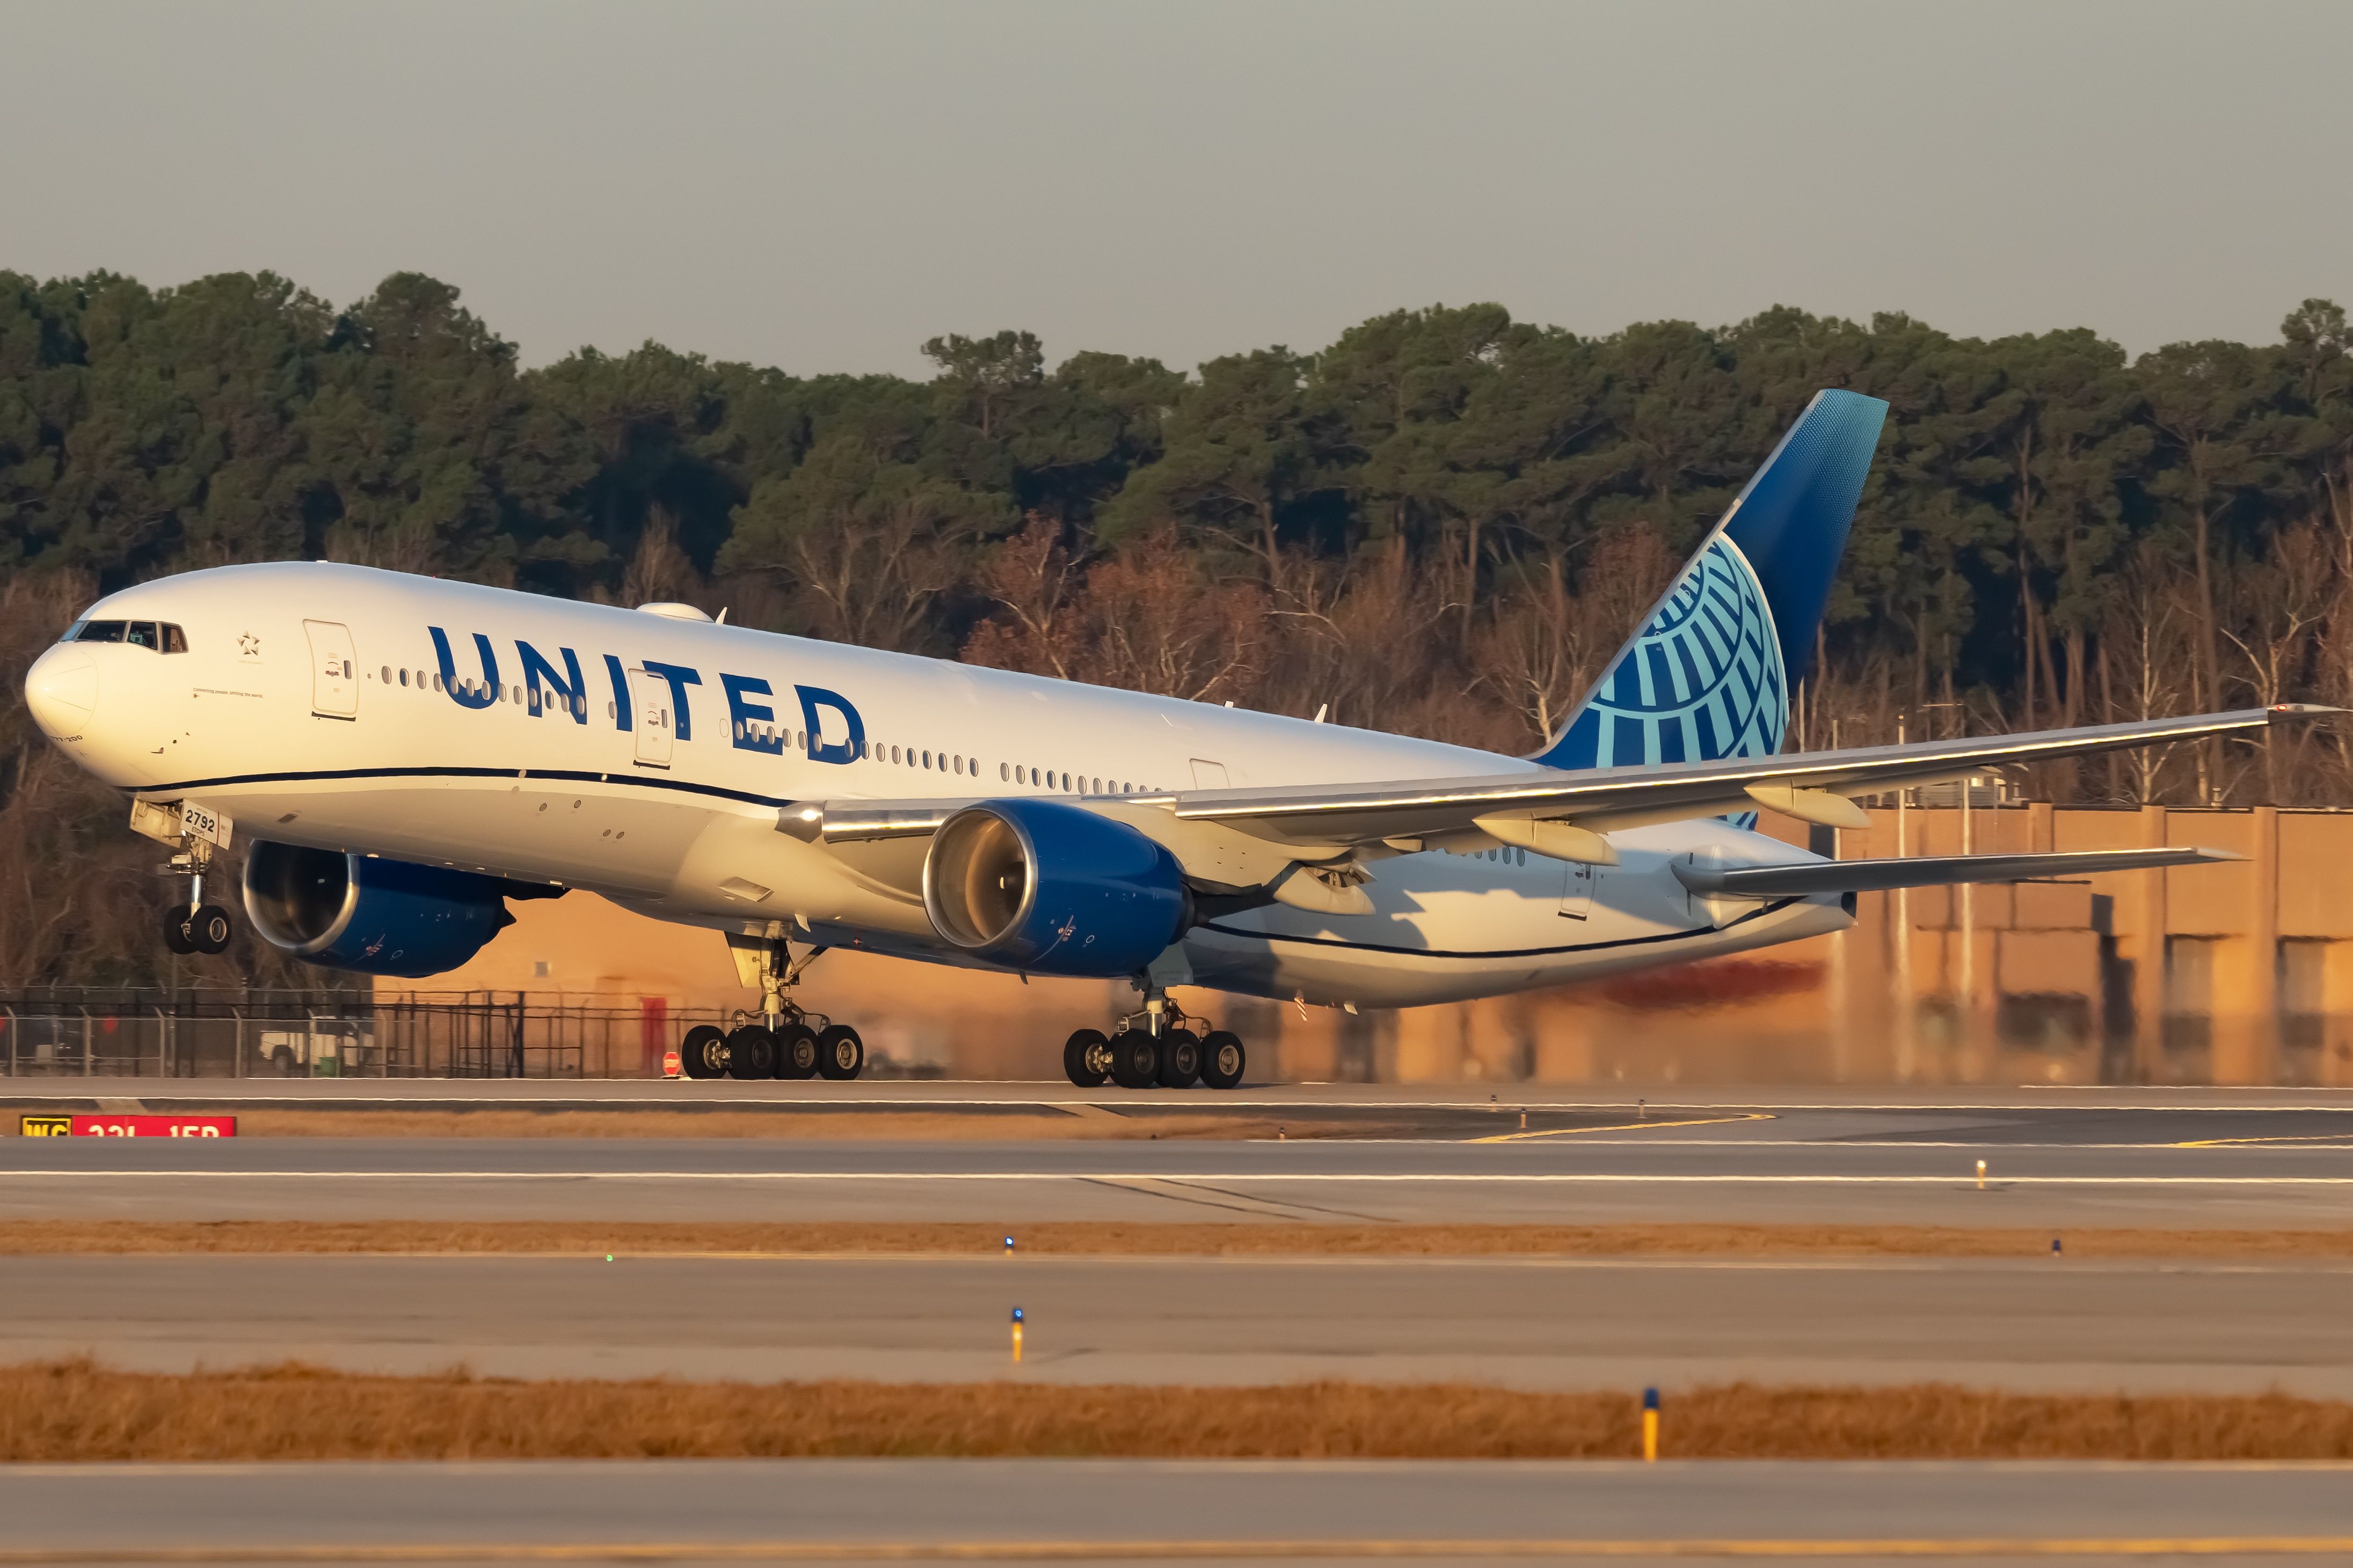 United Airlines Boeing 777 aircraft landing in Houston.